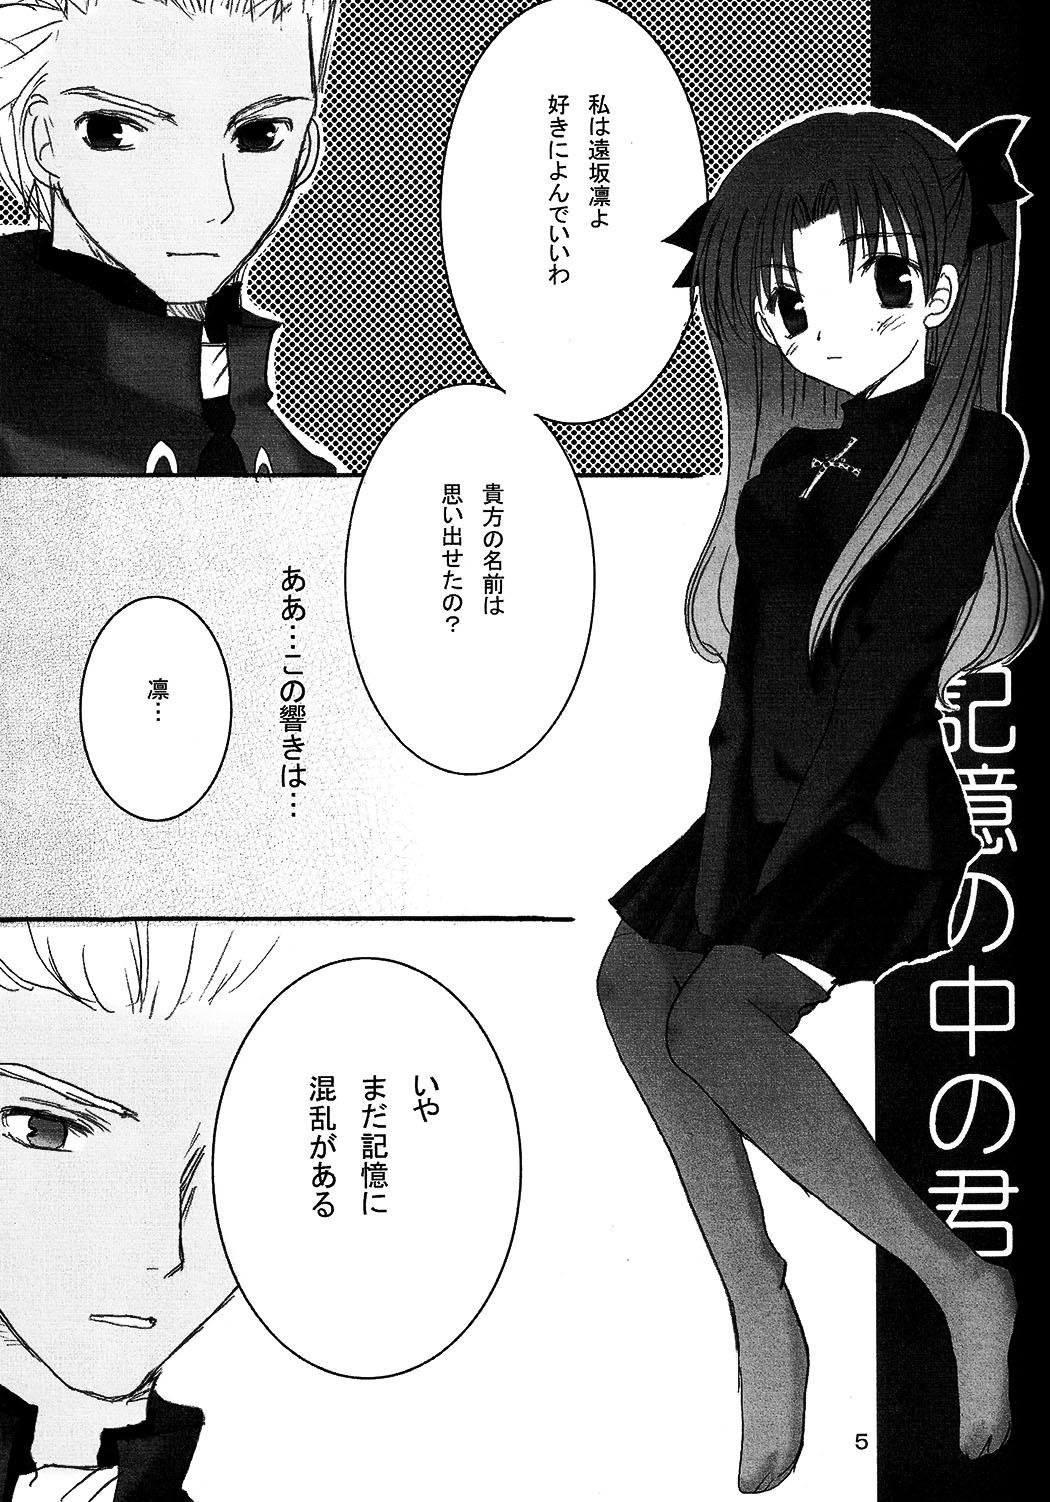 1080p DESTINY LOVER - Fate stay night Gay - Page 3